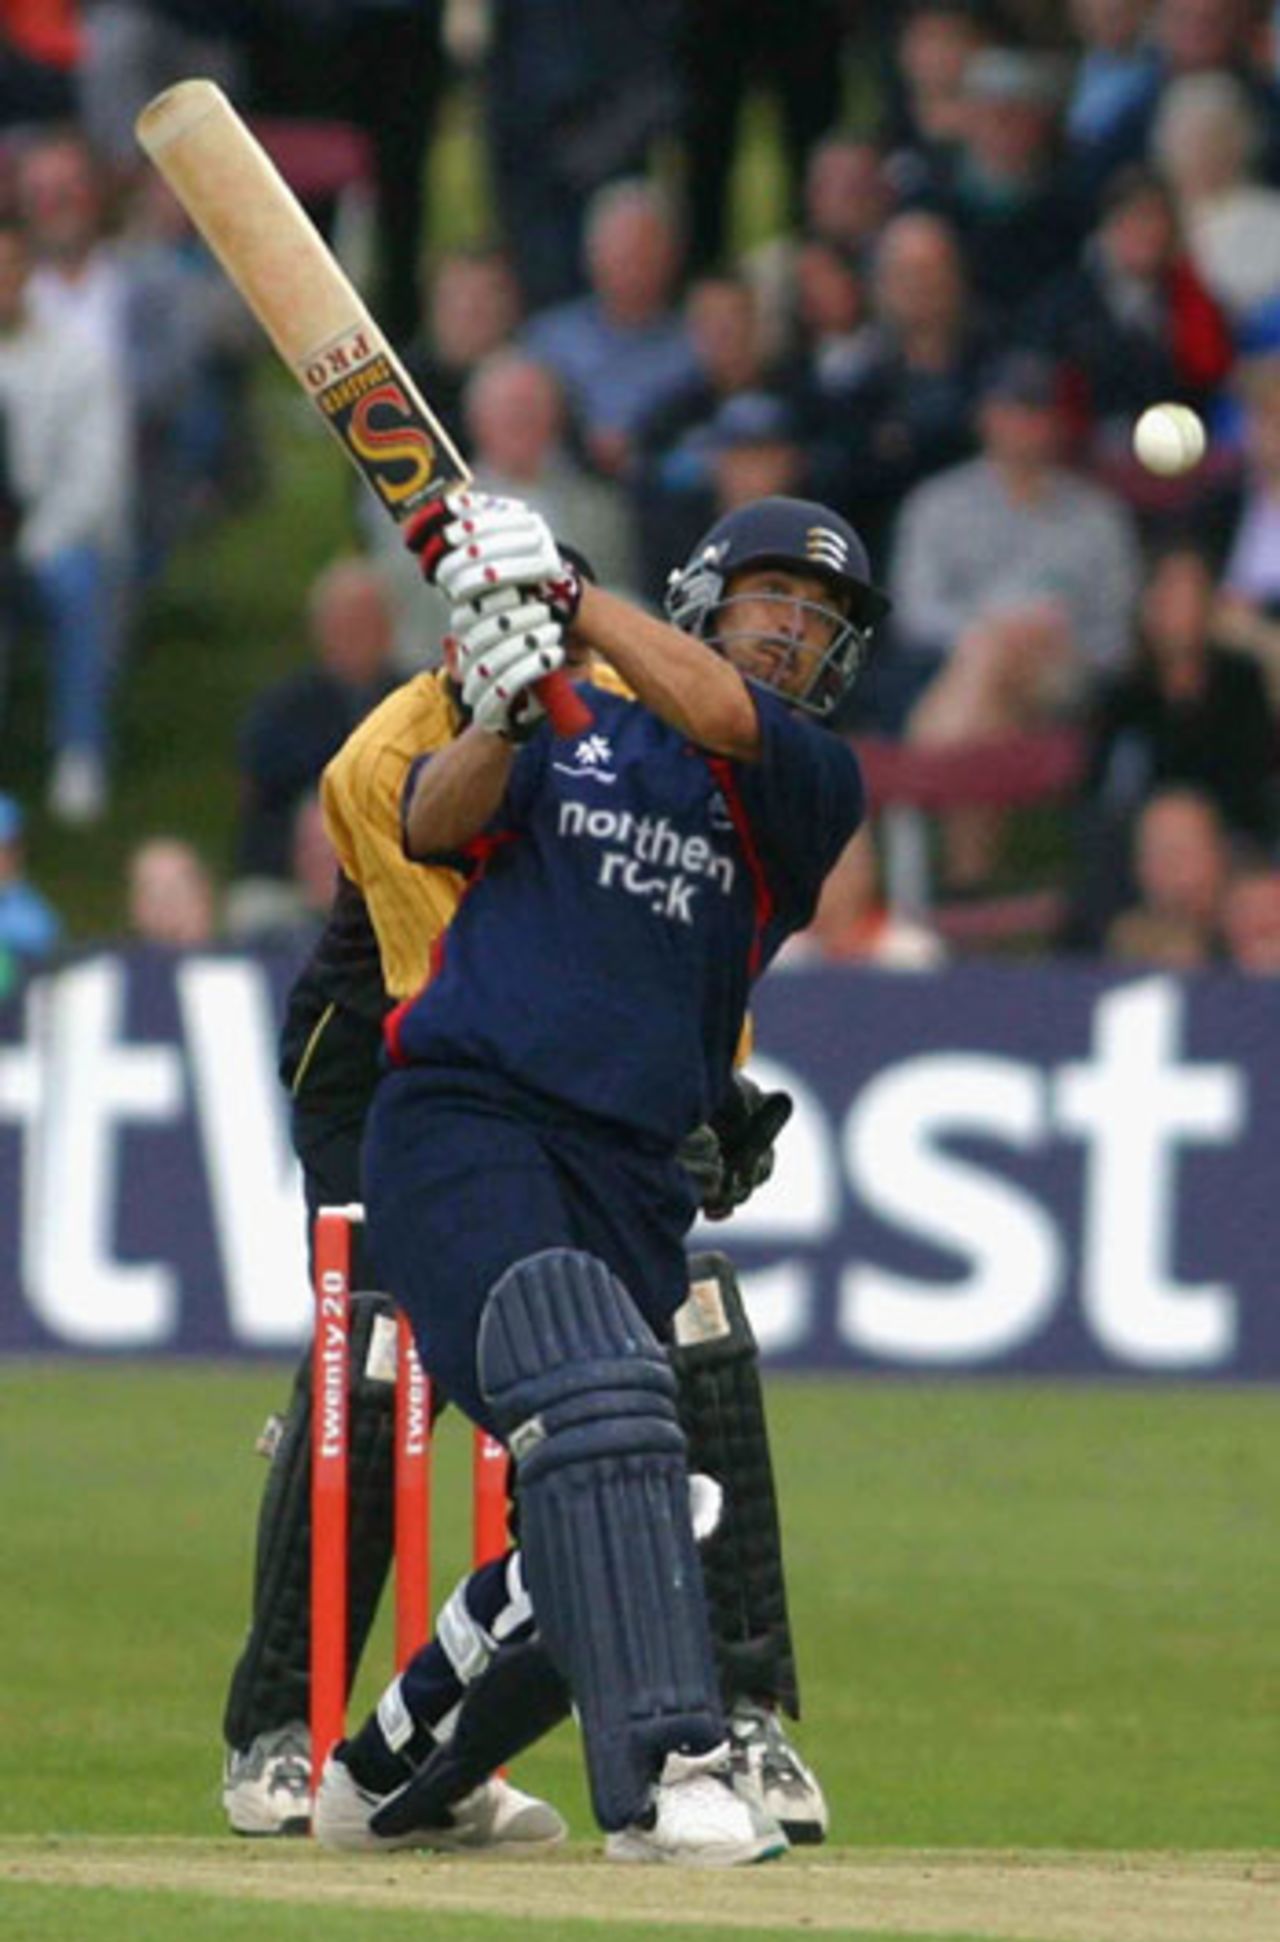 Paul Weekes hits out, Kent v Middlesex, Canterbury, July 2, 2004